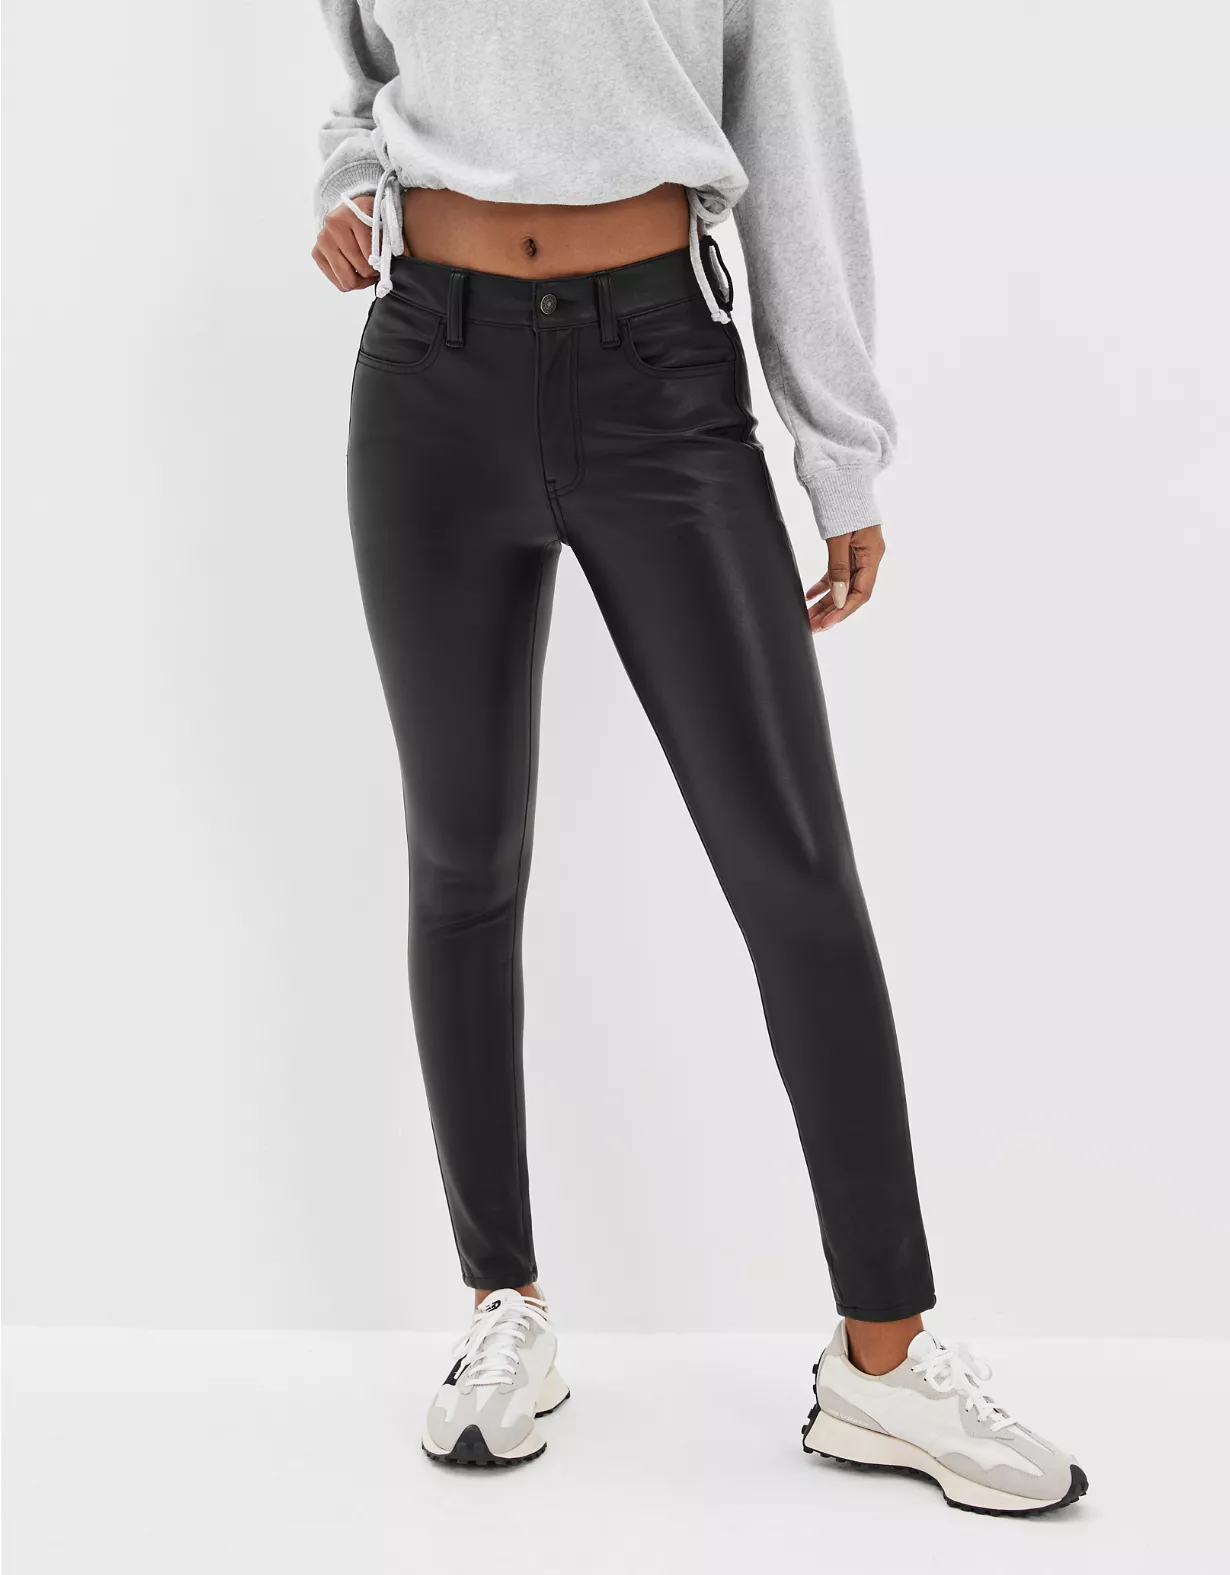 AE Stretch Vegan Leather High-Waisted Jegging